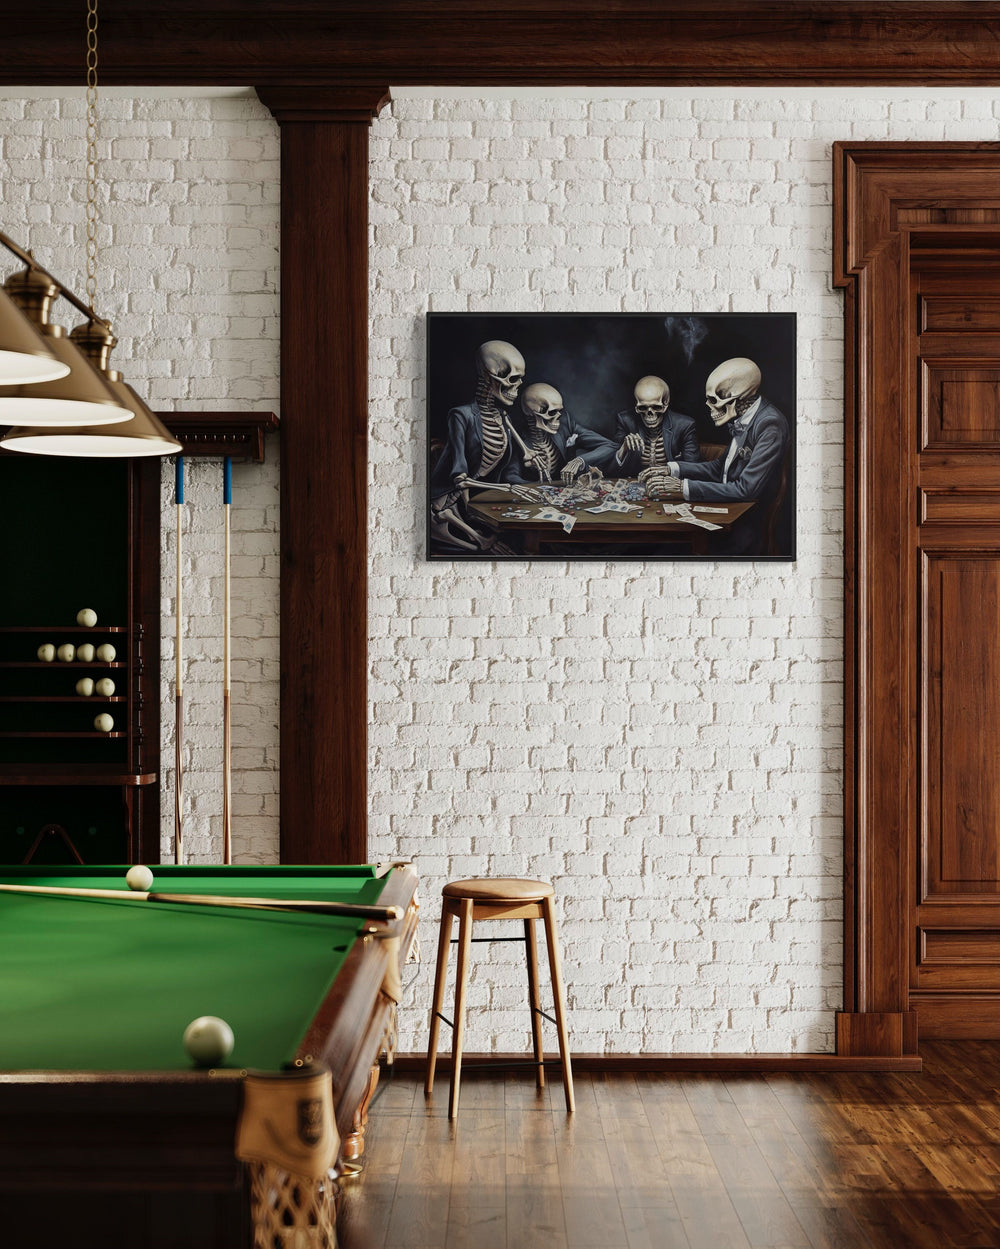 Skeletons Playing Poker Wall Art in game room